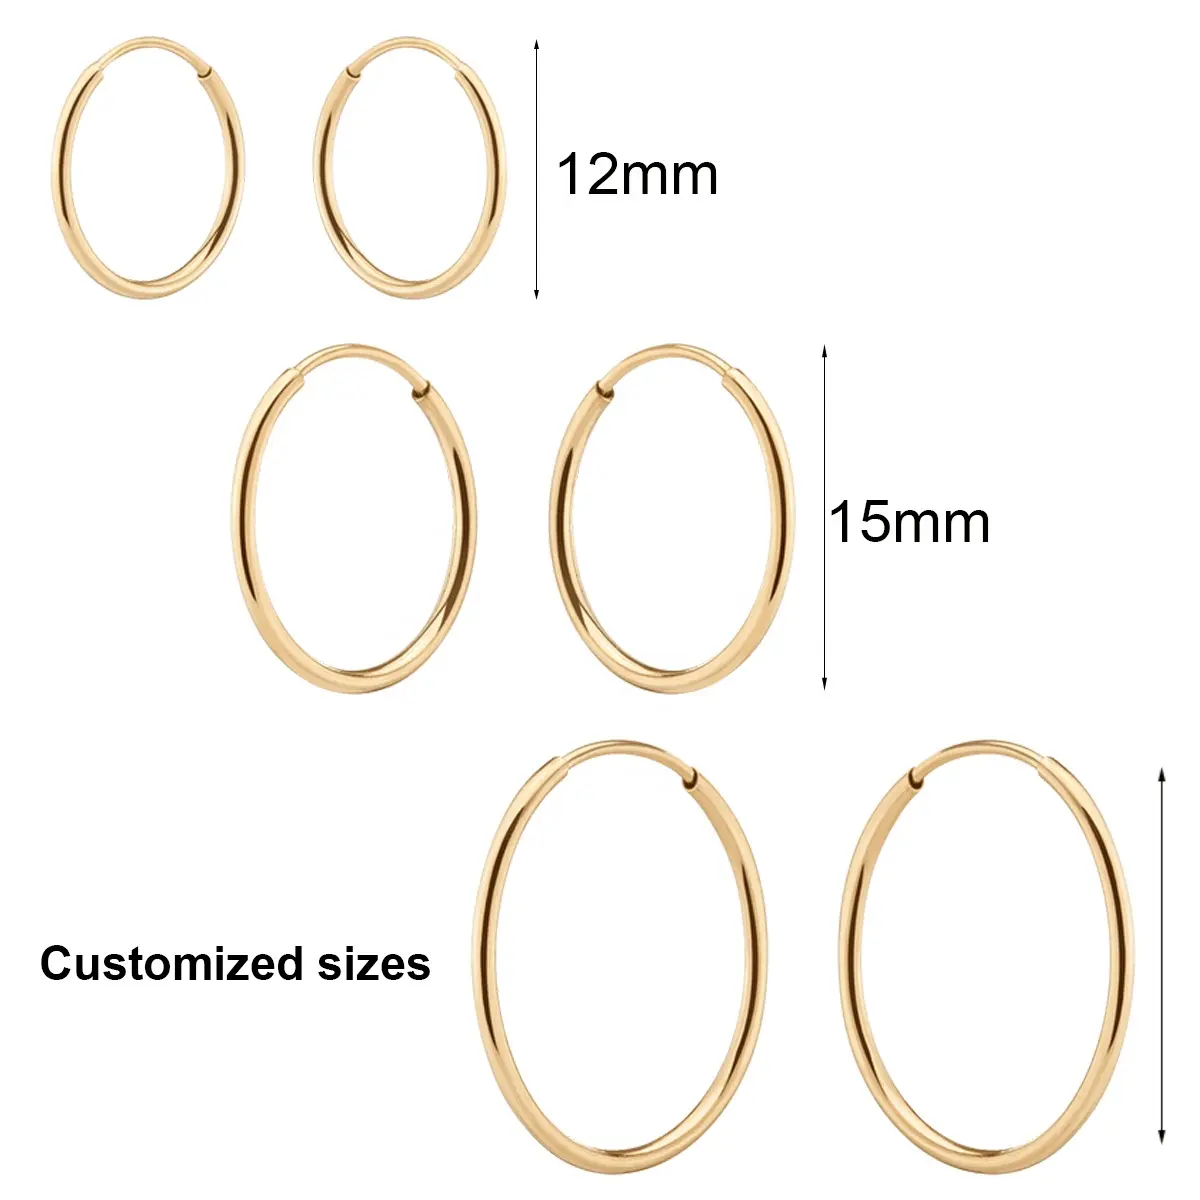 Custom Jewelry 12mm 15mm Light Weight Dainty Real 9K 14K Solid Gold Tiny Endless Hollow Tube Women Hoop Earrings